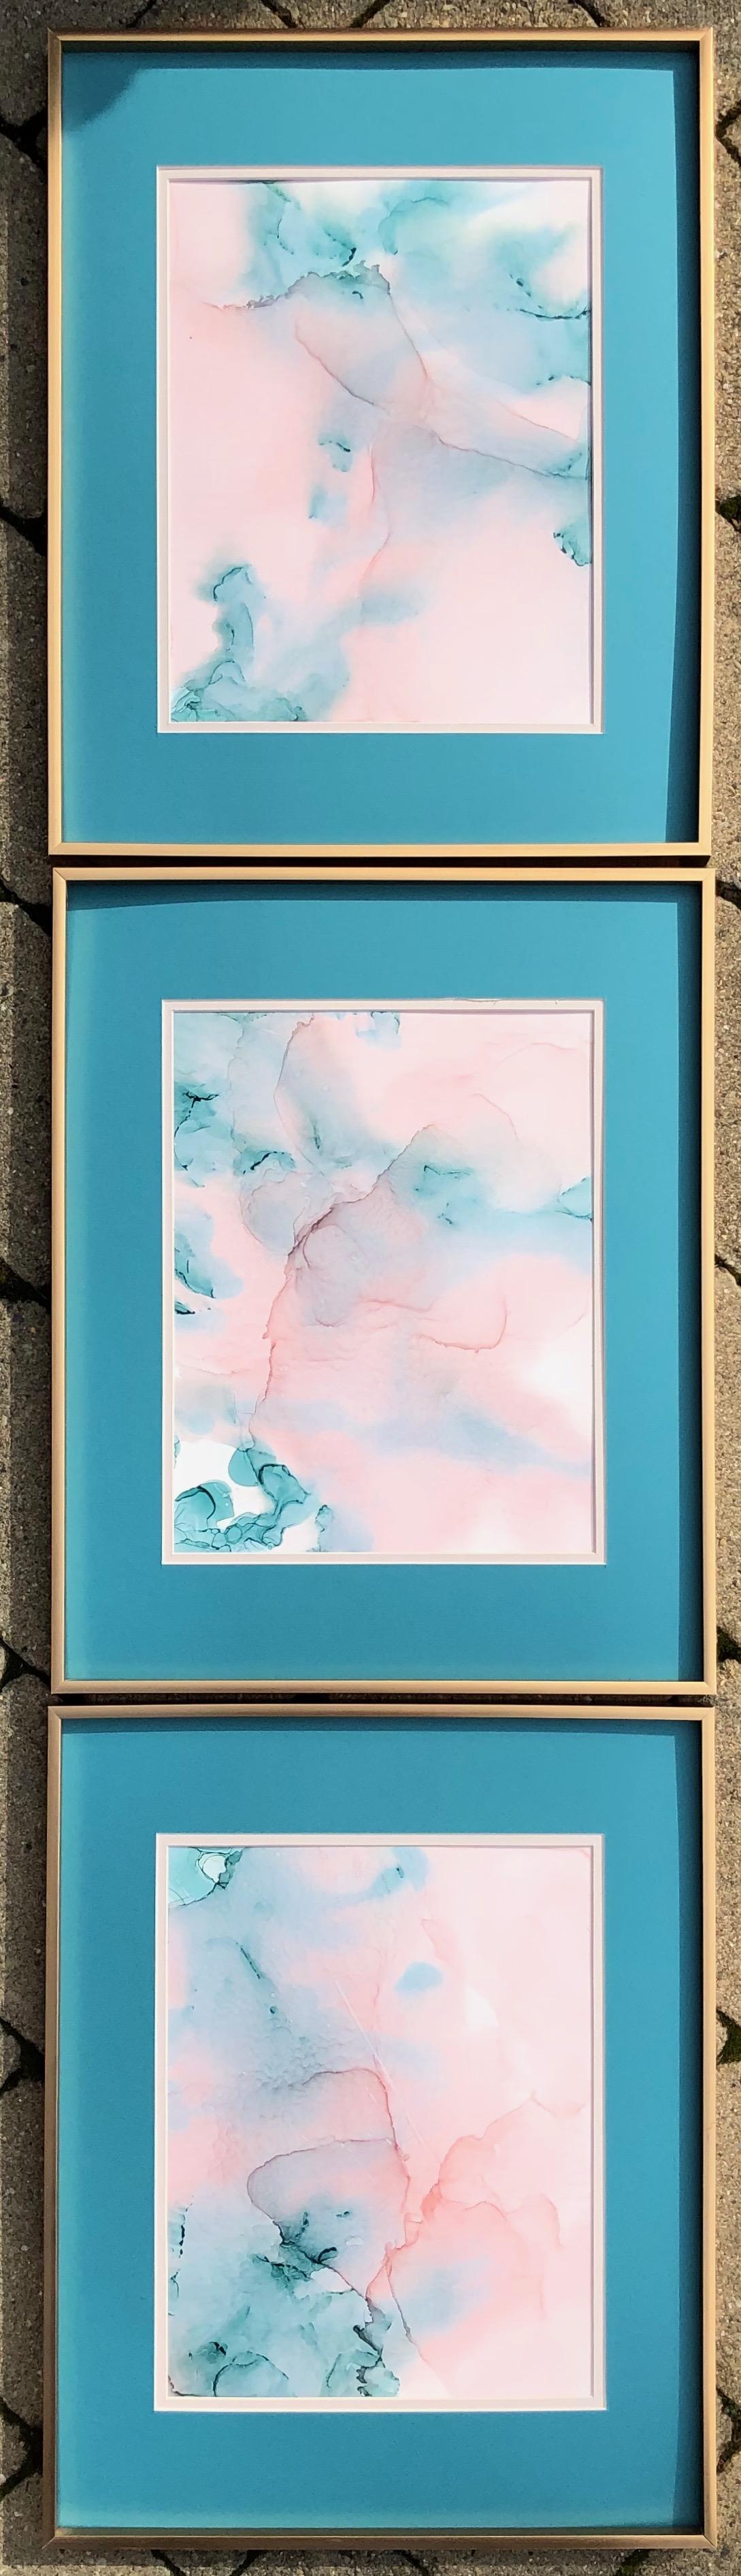 Mila Akopova Abstract Drawing - Cote D'Azur- abstraction art, made in pale pink, turquoise color